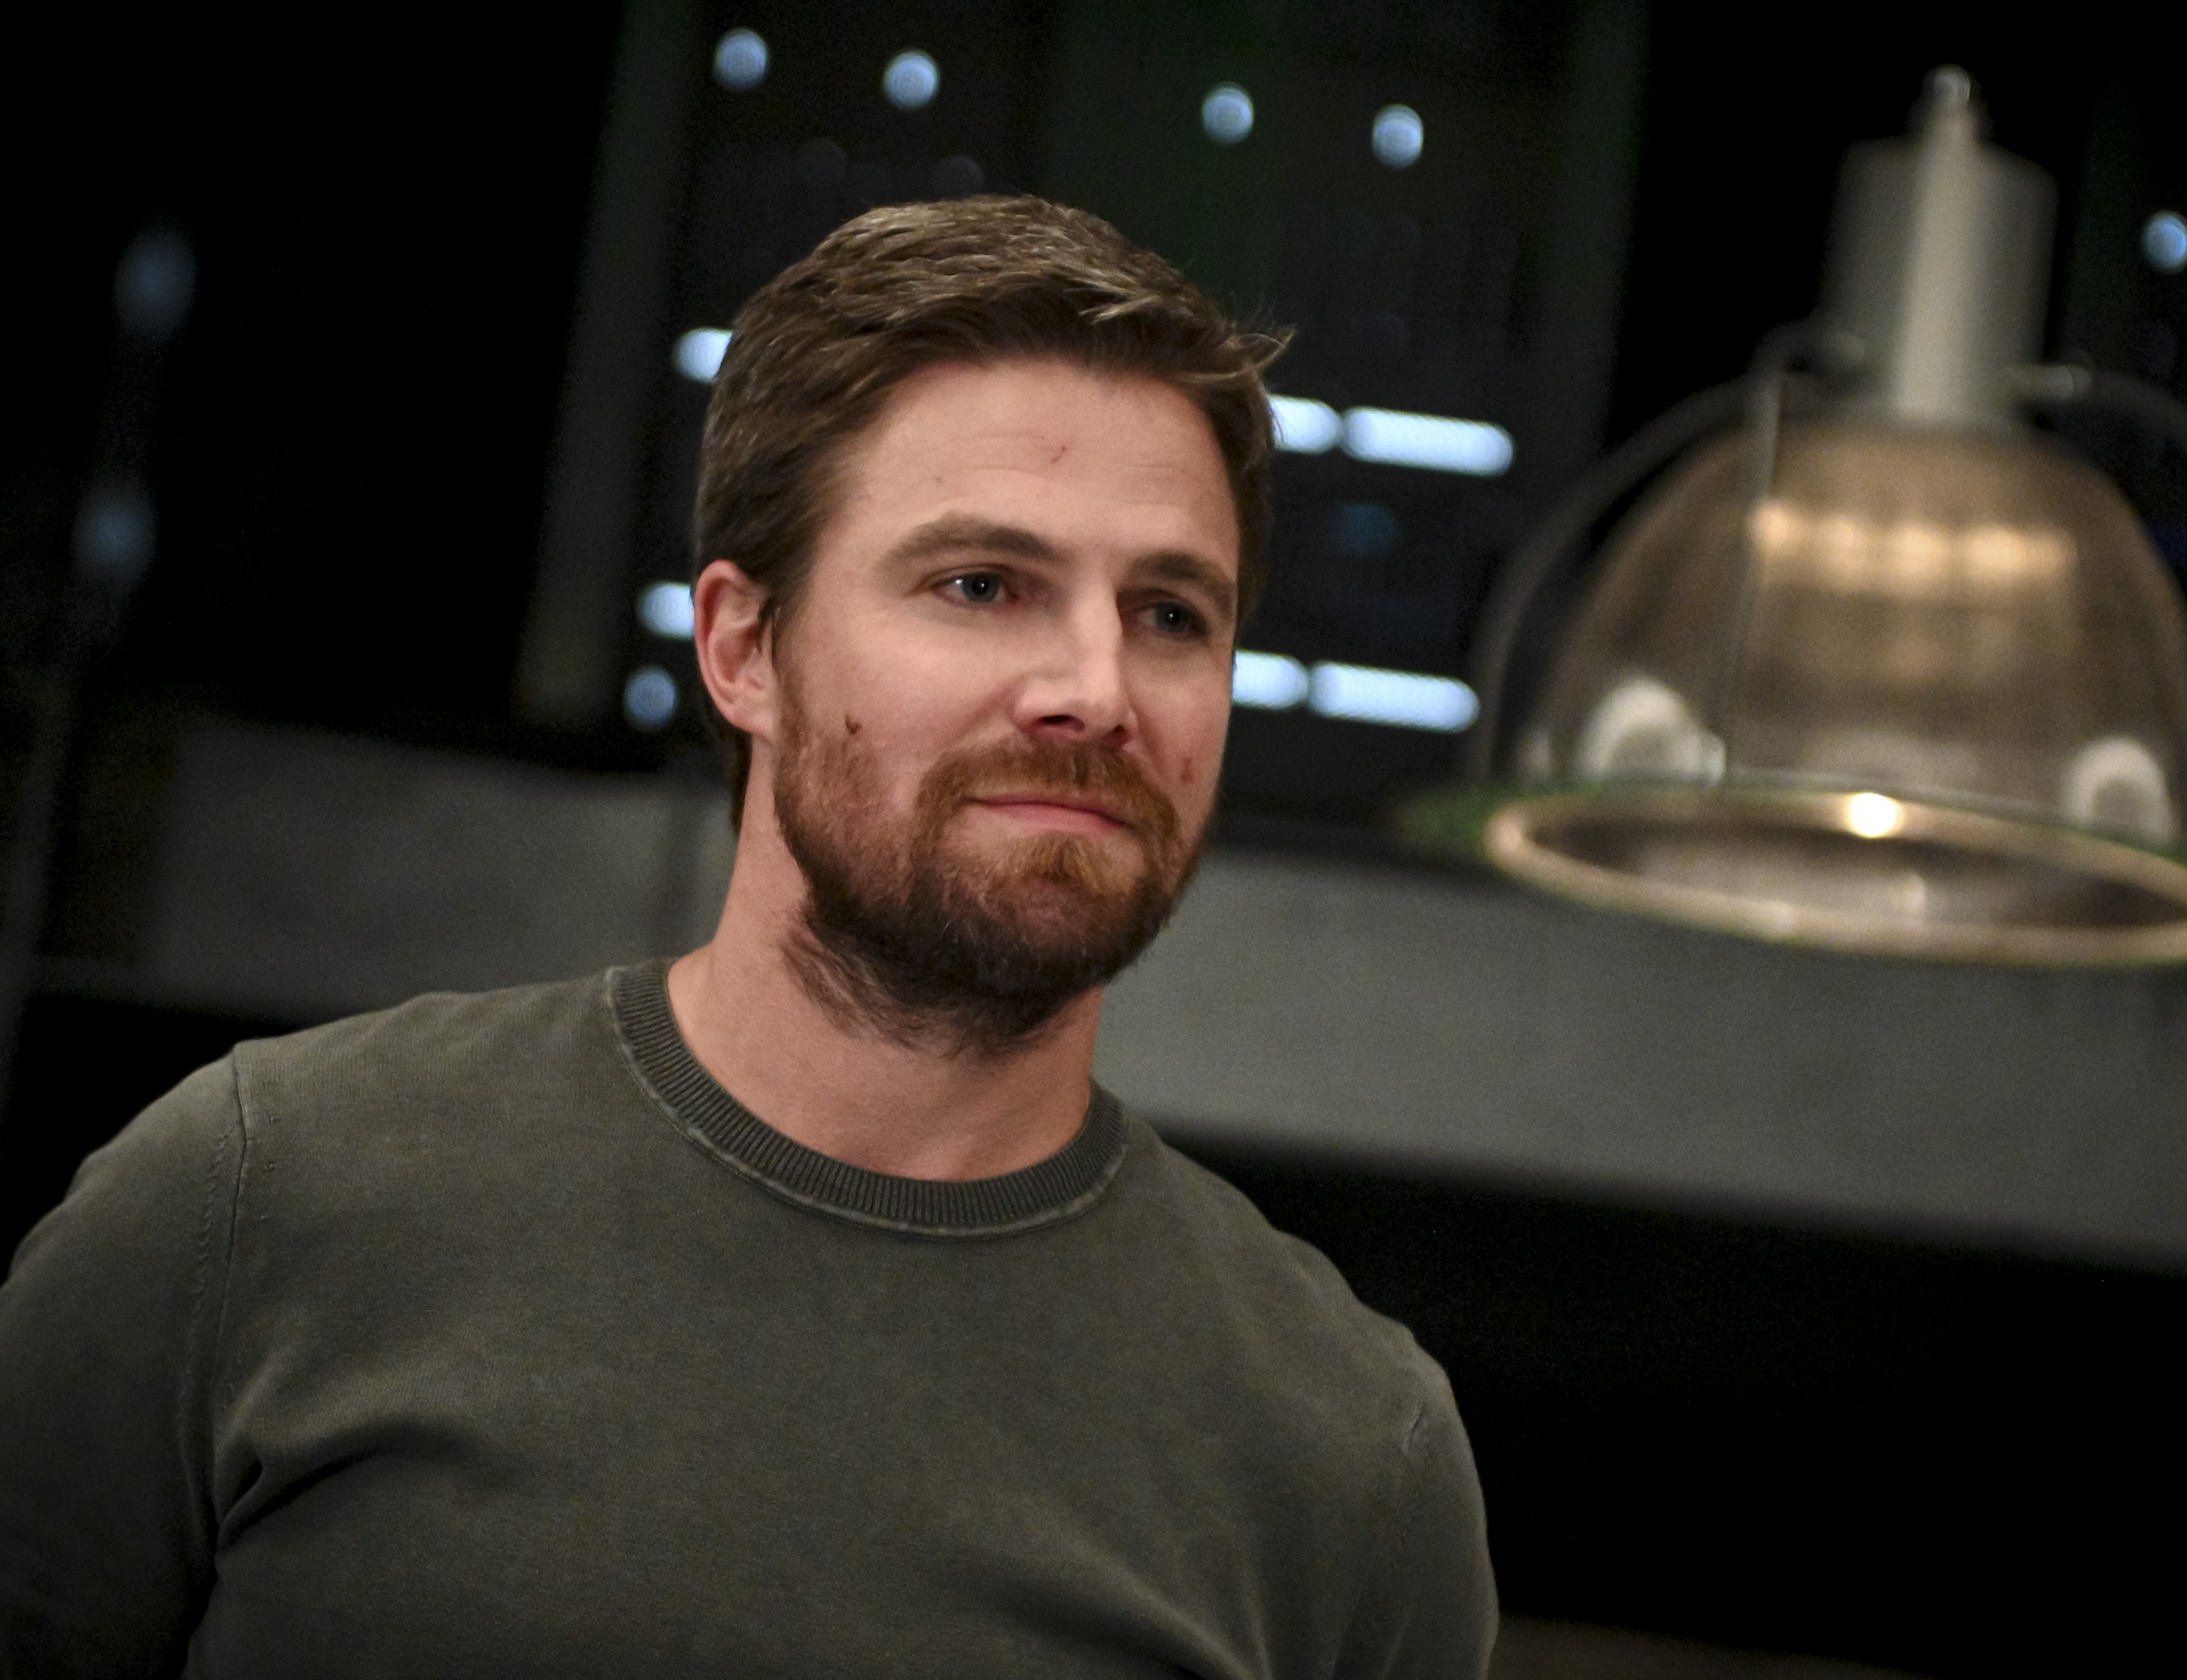 Arrow Oliver Queen Returns To The Arrowcave In New Photos From Season 8 Episode 4 Present Tense 7734